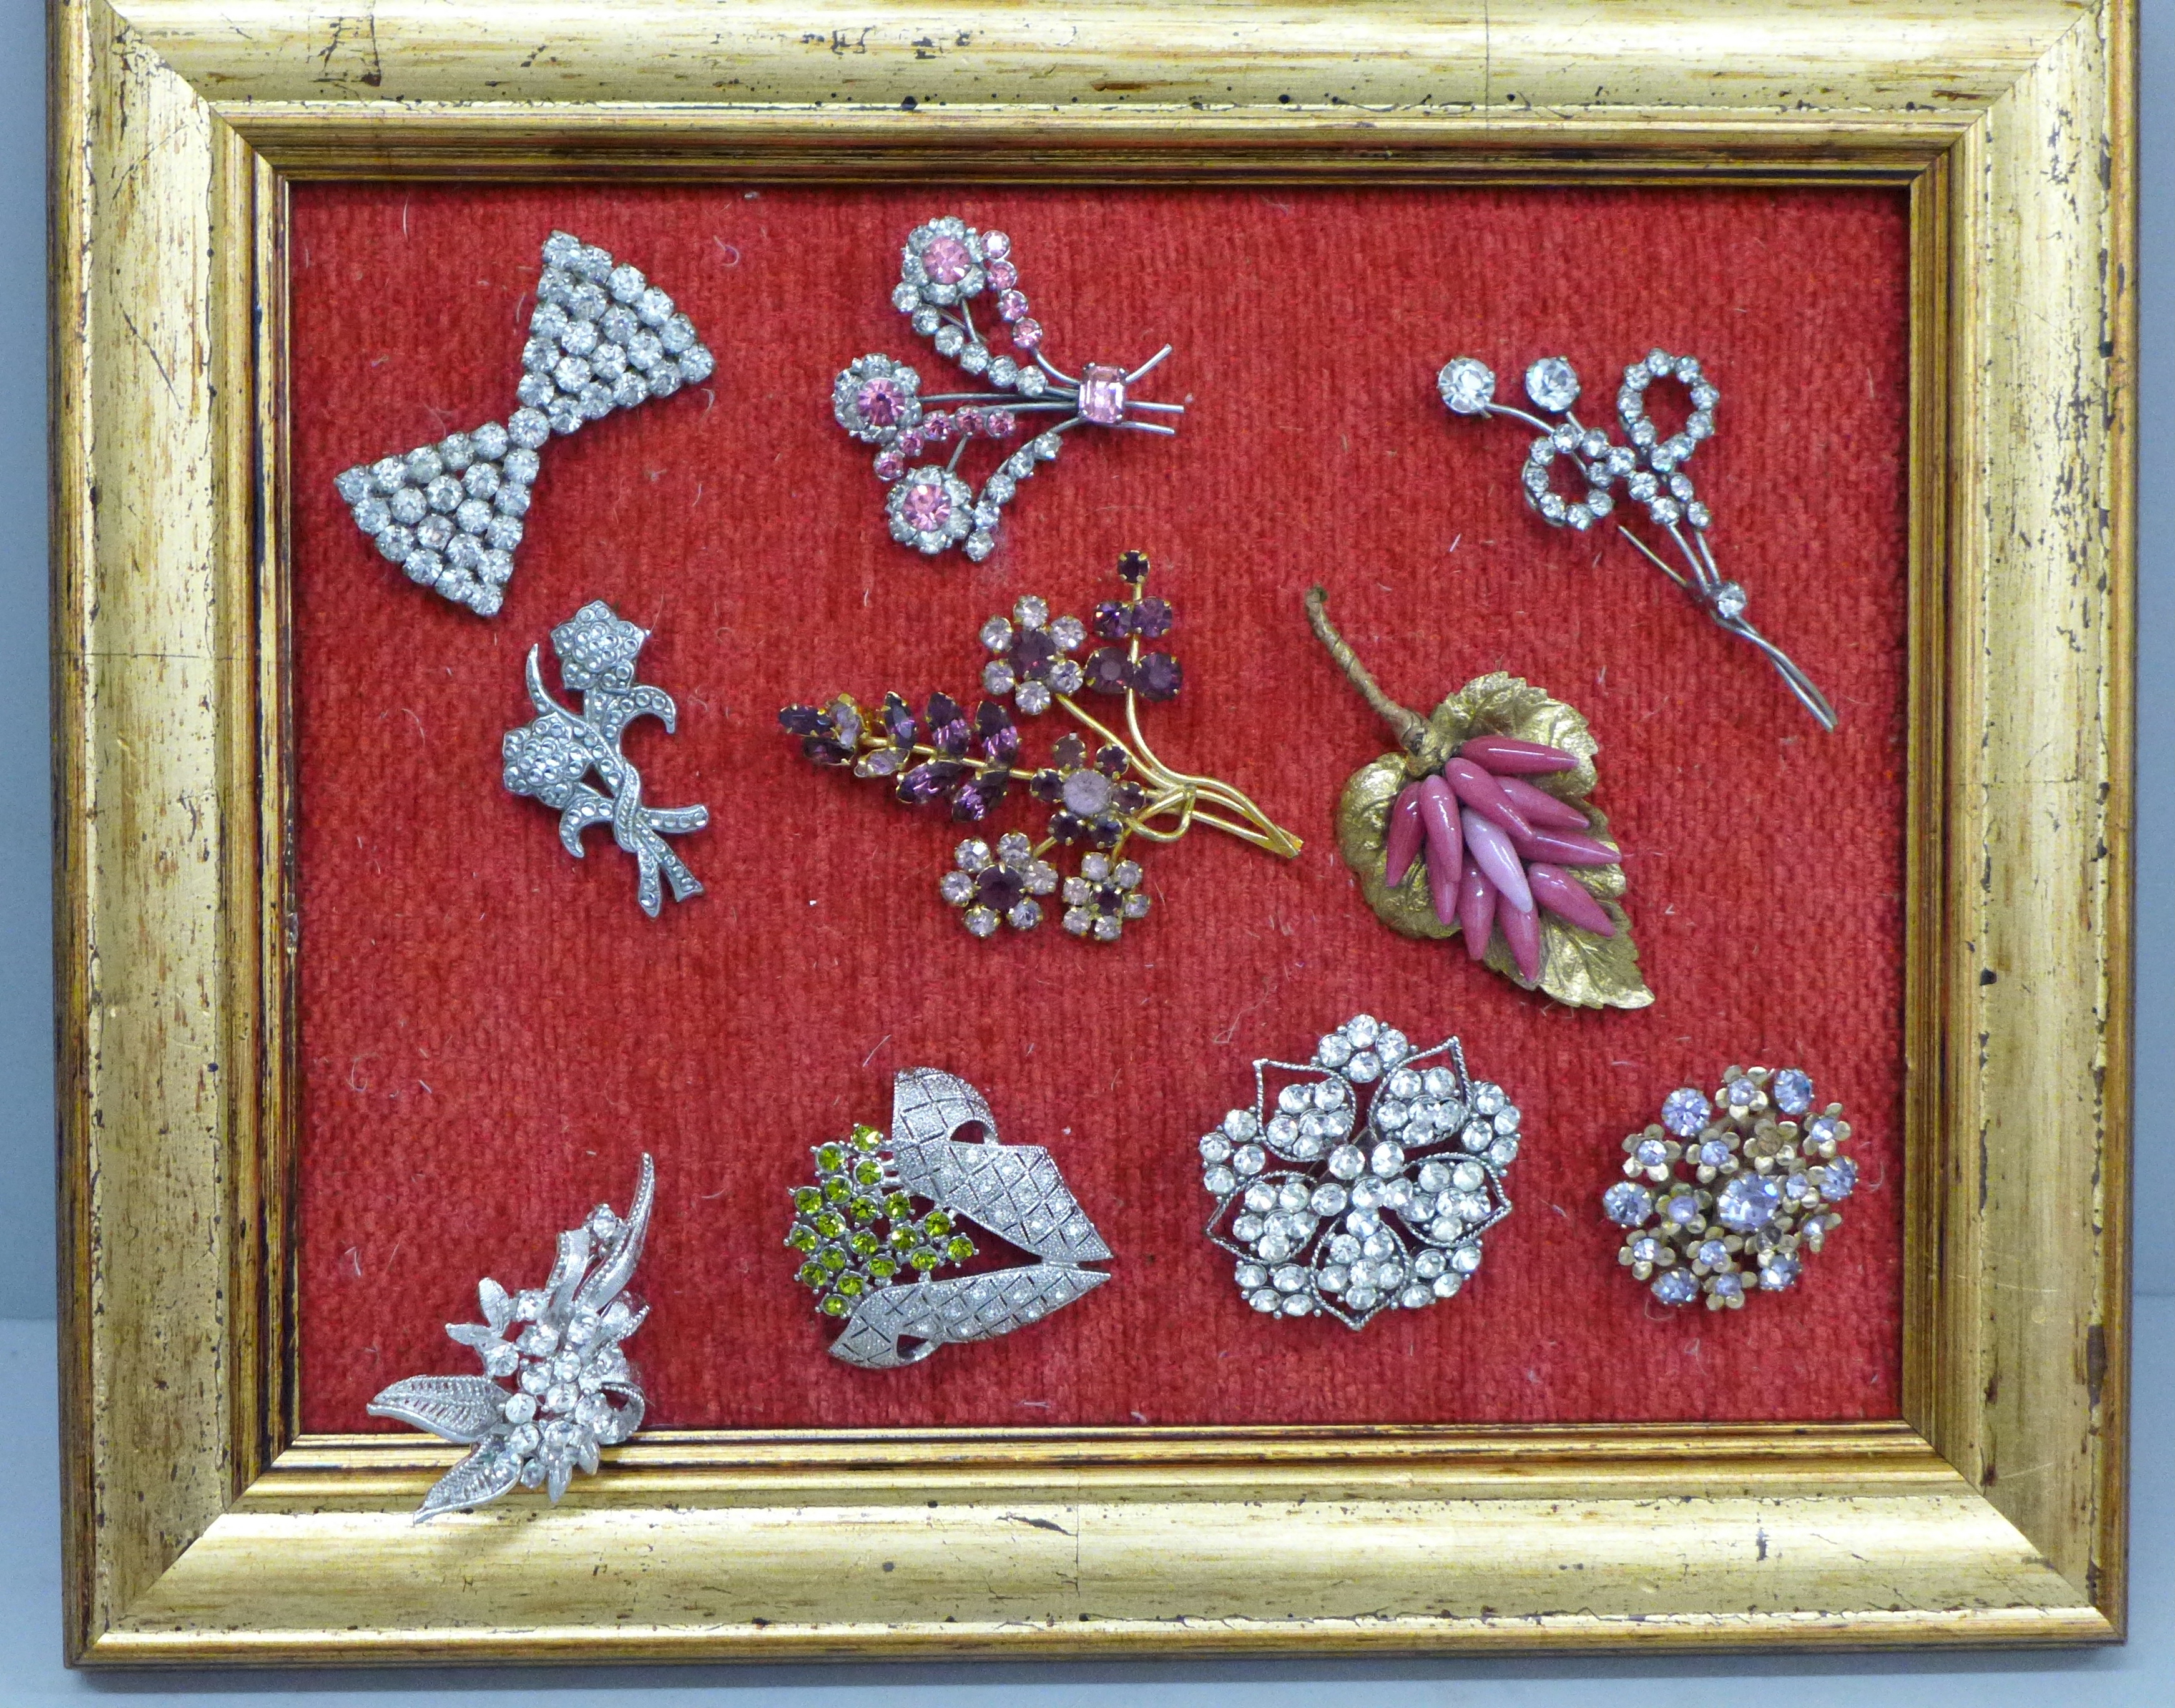 Ten vintage costume brooches on a display stand